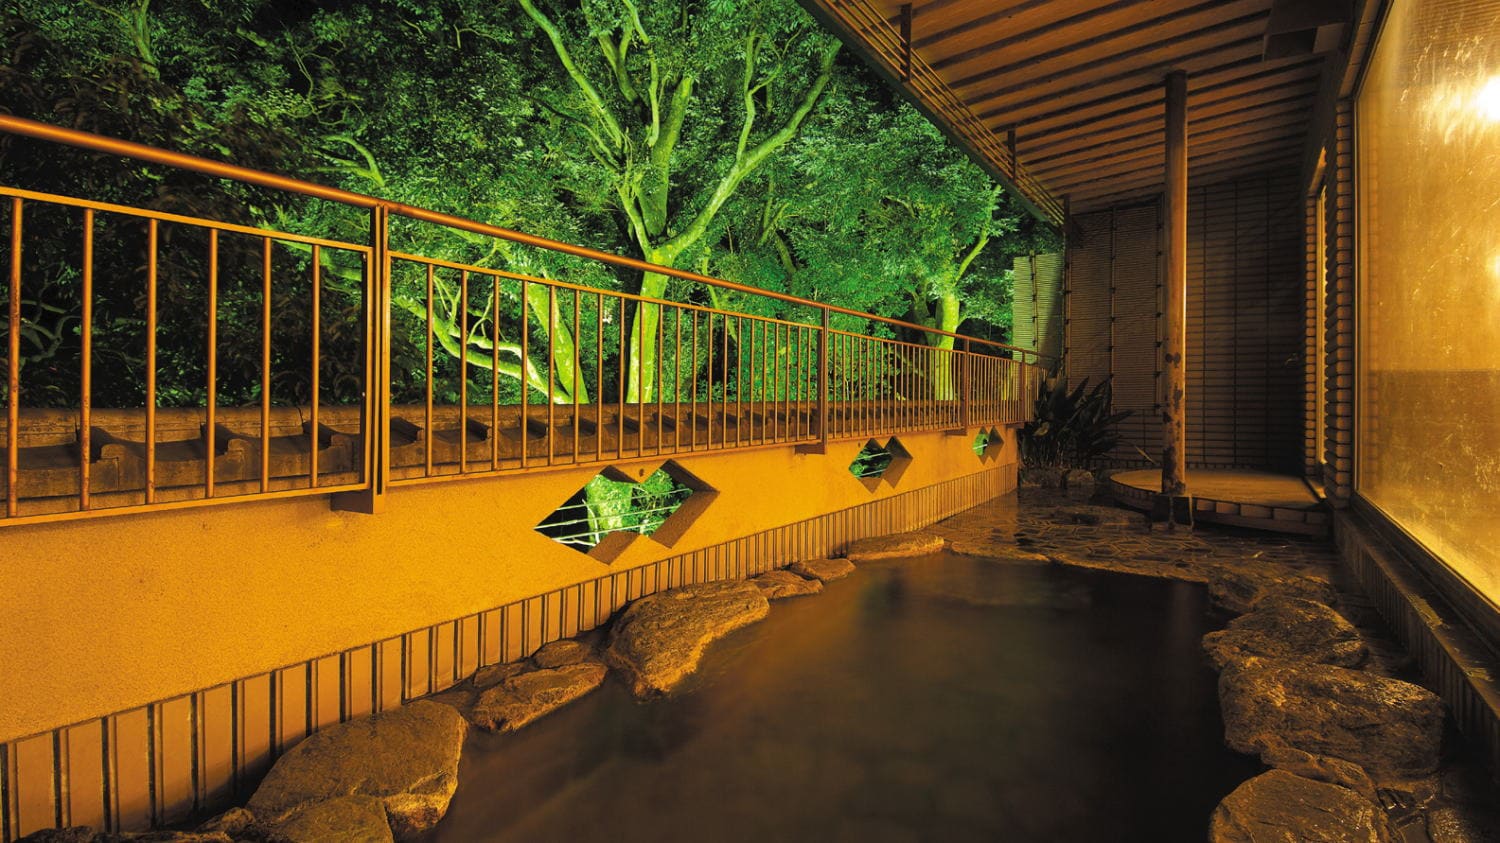 The night view where the trees are illuminated is fantastic and warms the heart. "Rock open-air bath"